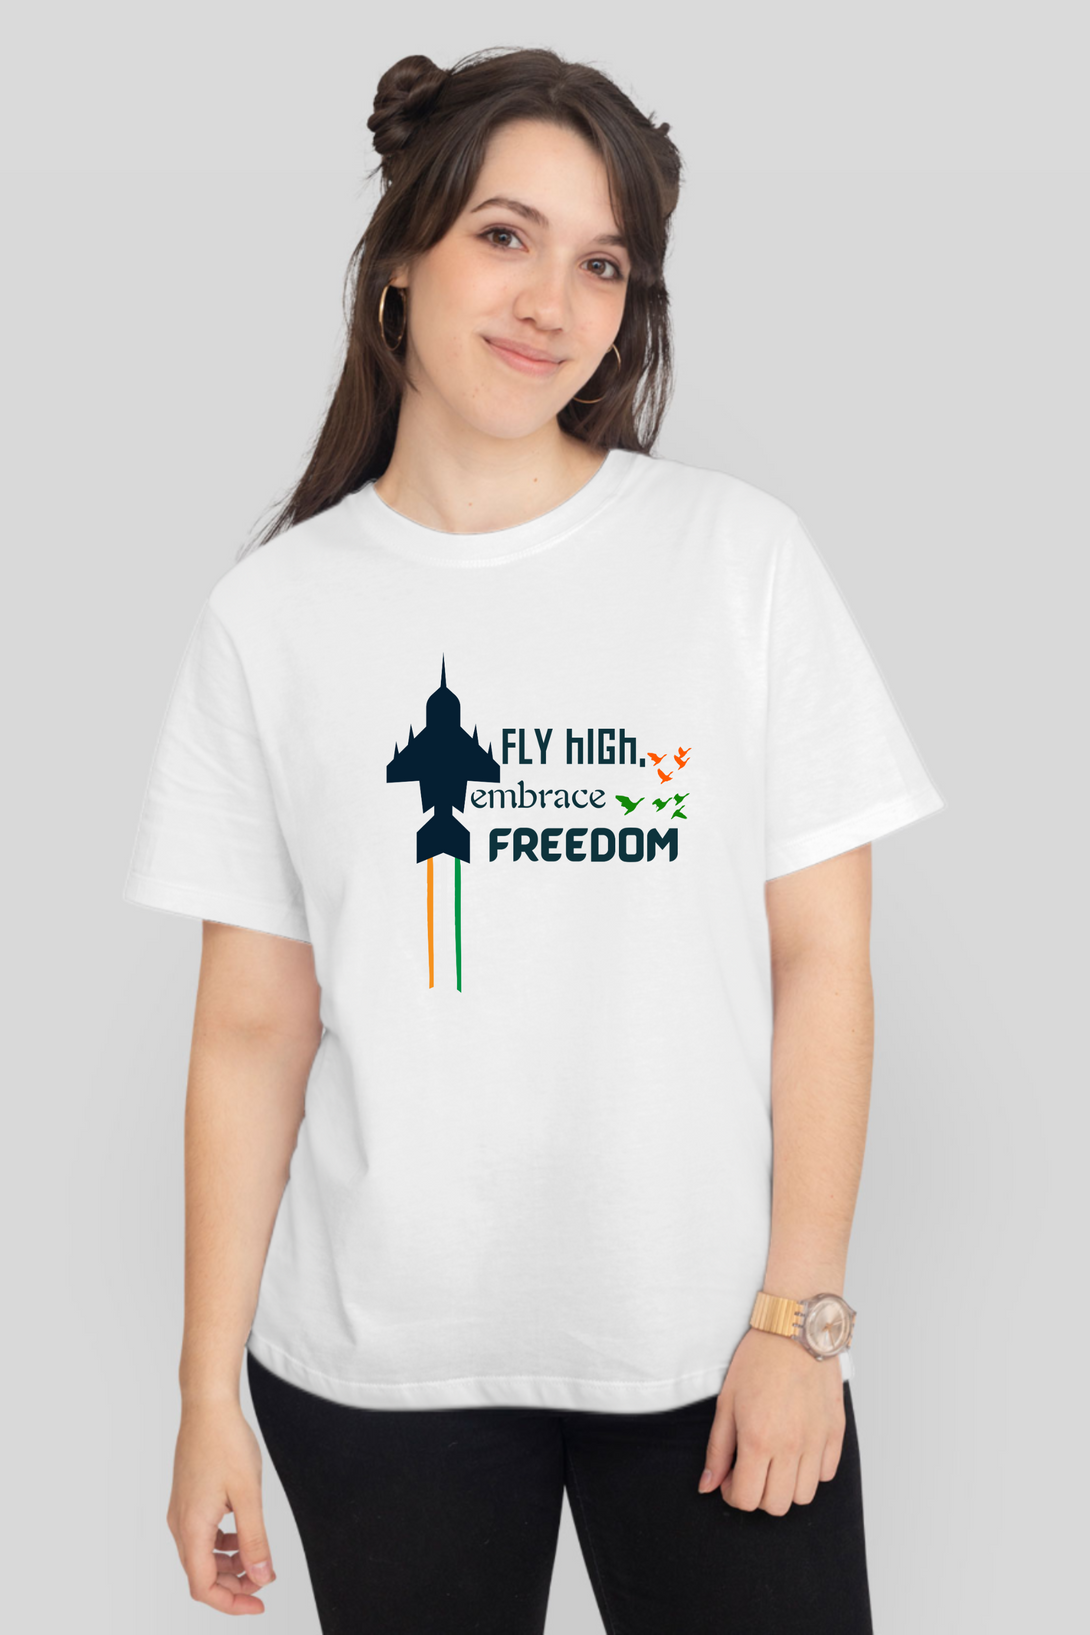 Fly High Embrace Freedom White Printed T-Shirt For Women - WowWaves - 5